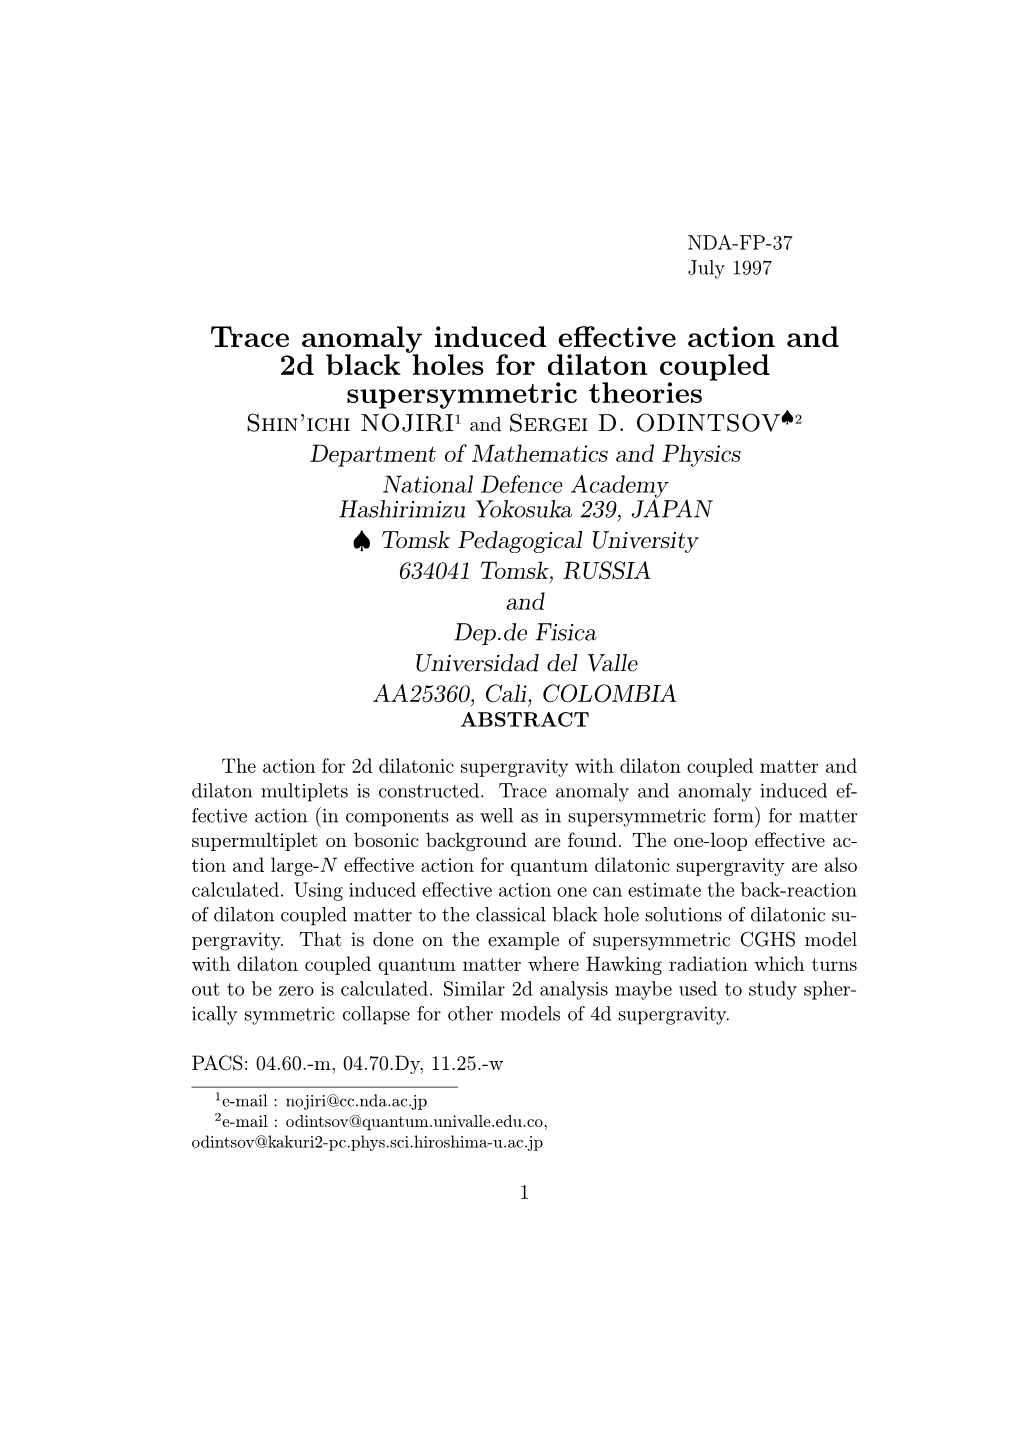 Trace Anomaly Induced Effective Action and 2D Black Holes